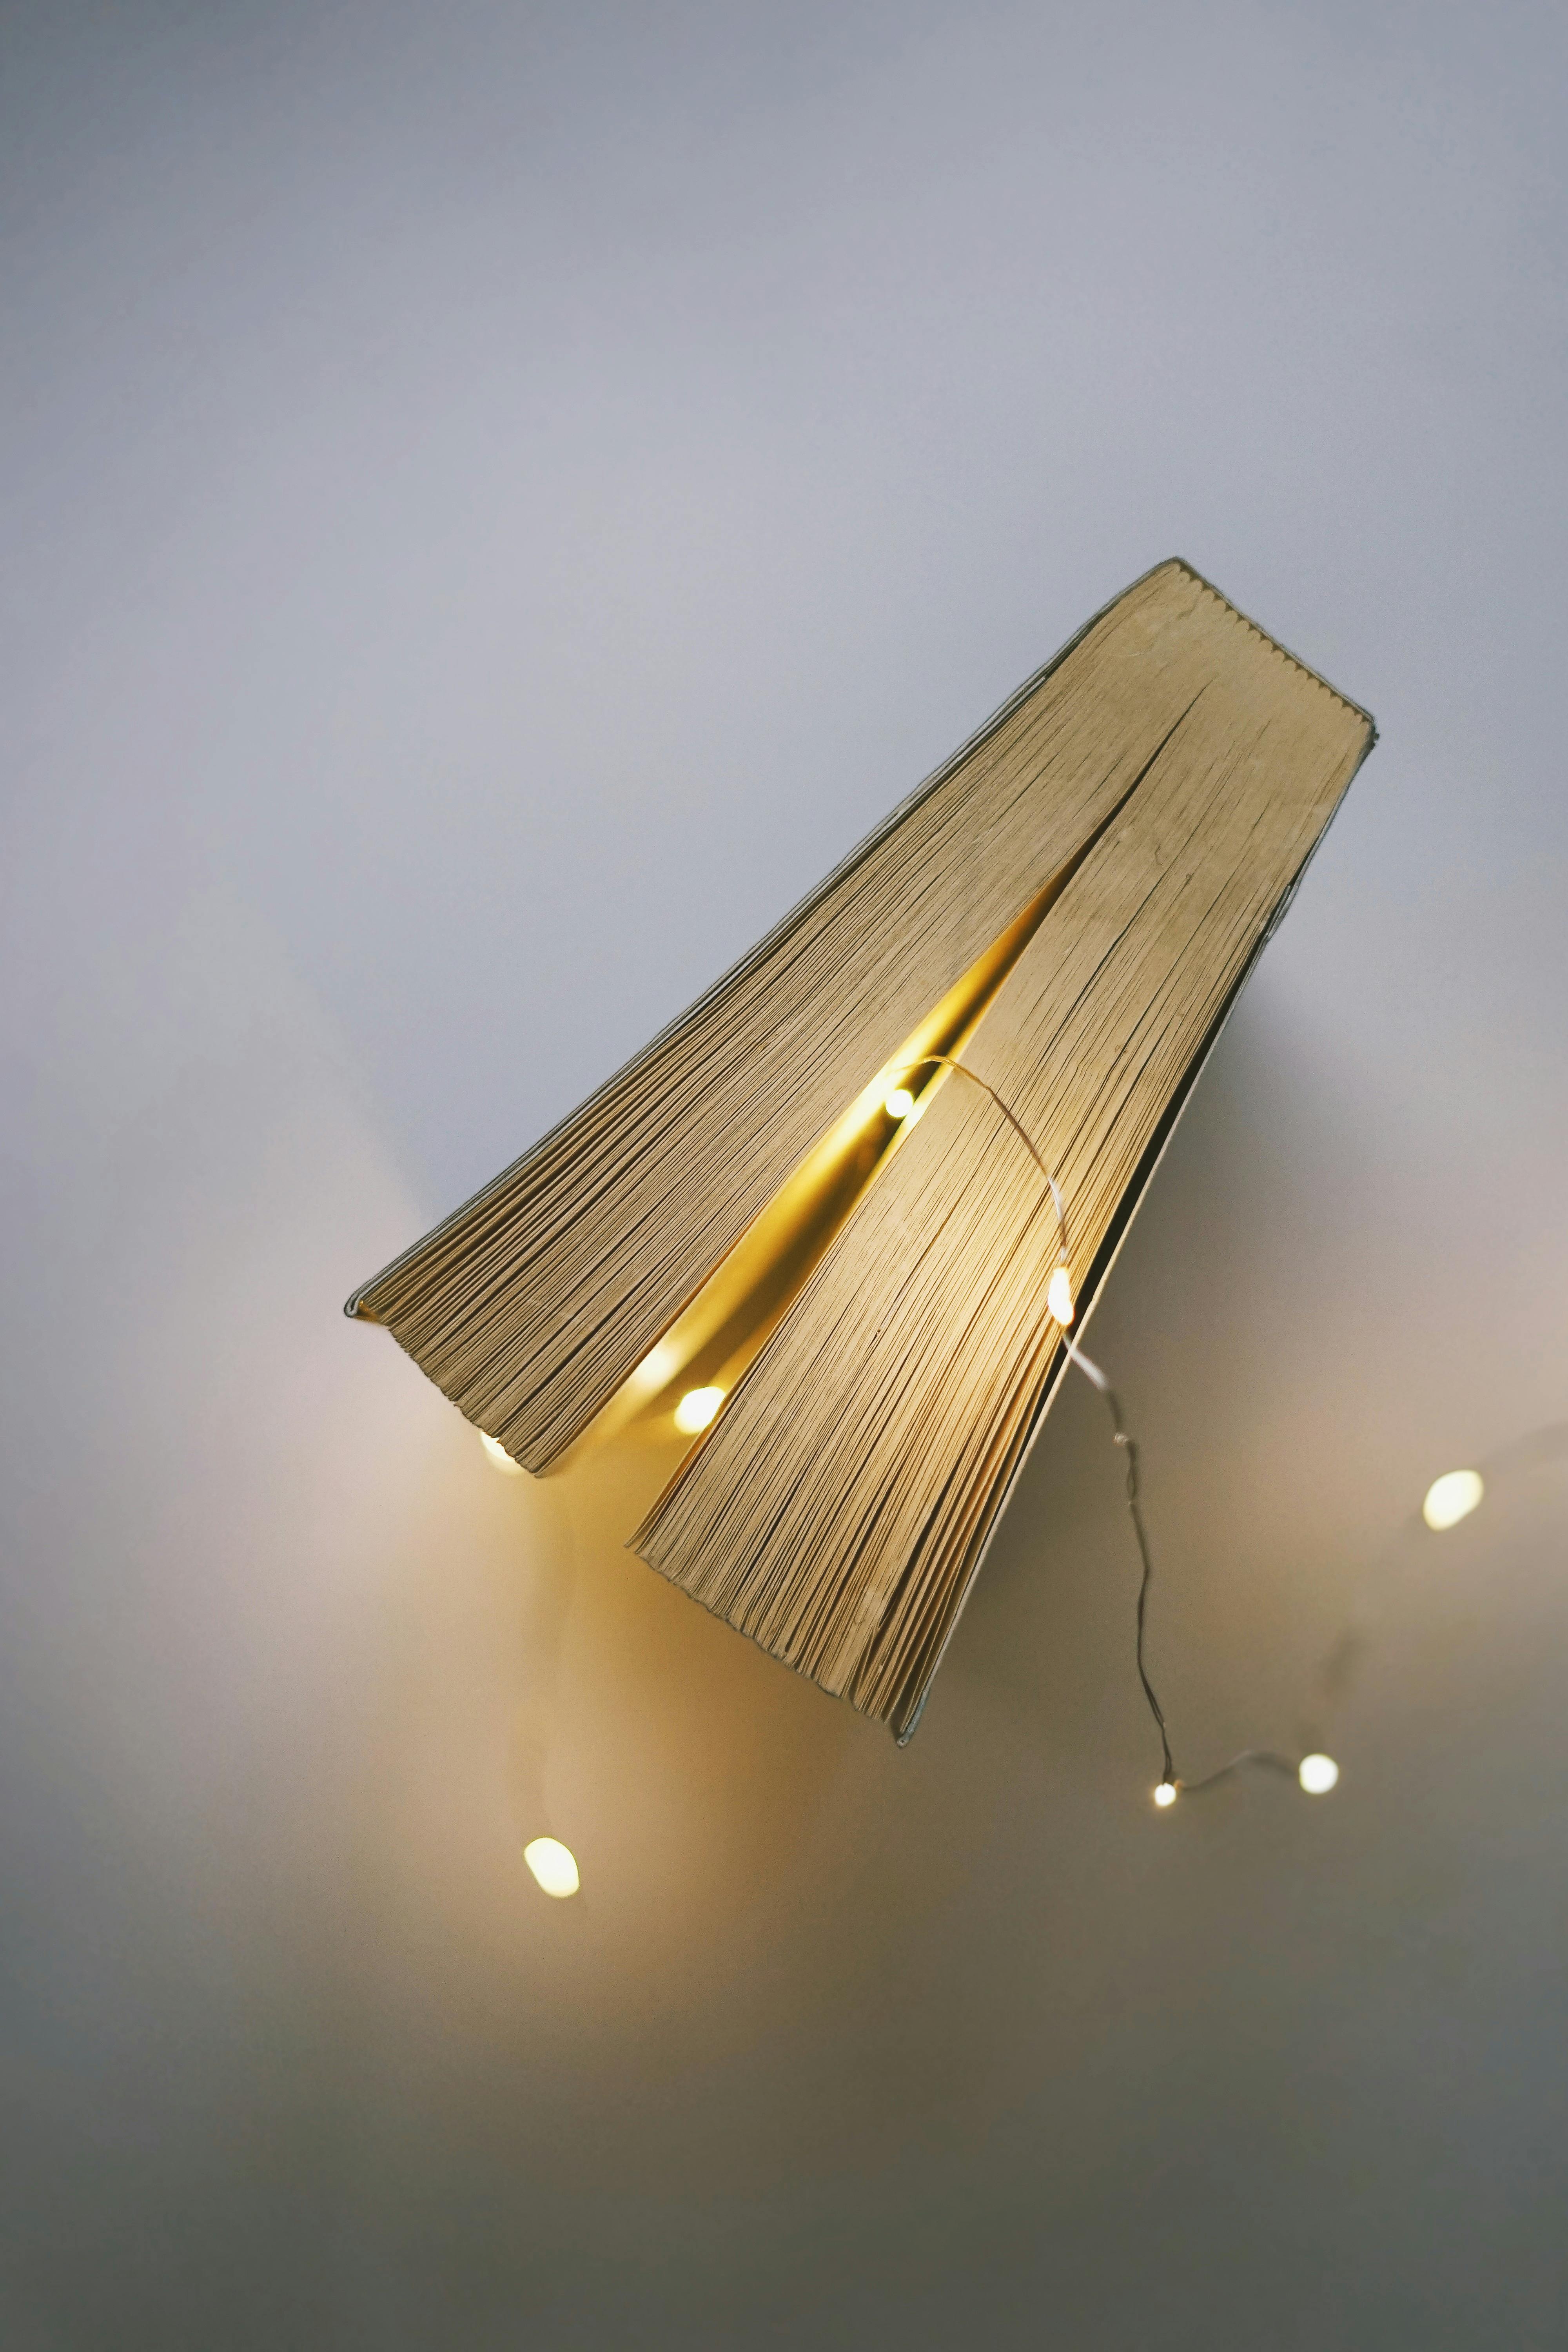 Closed Book Beside Gray String Light on White Surface